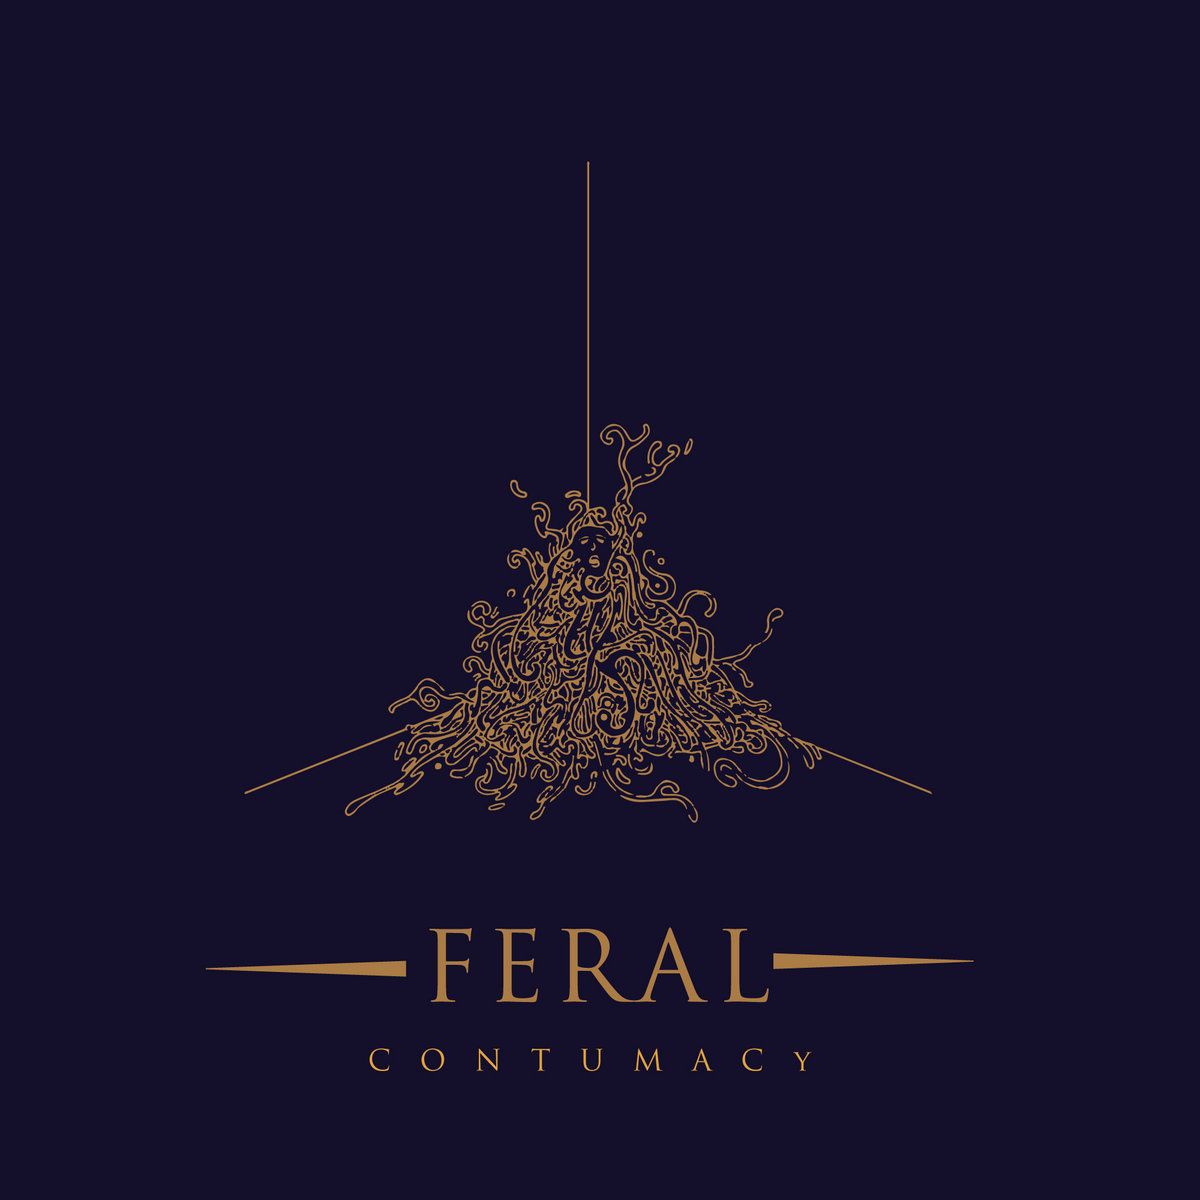 CONTUMACY - Feral cover 